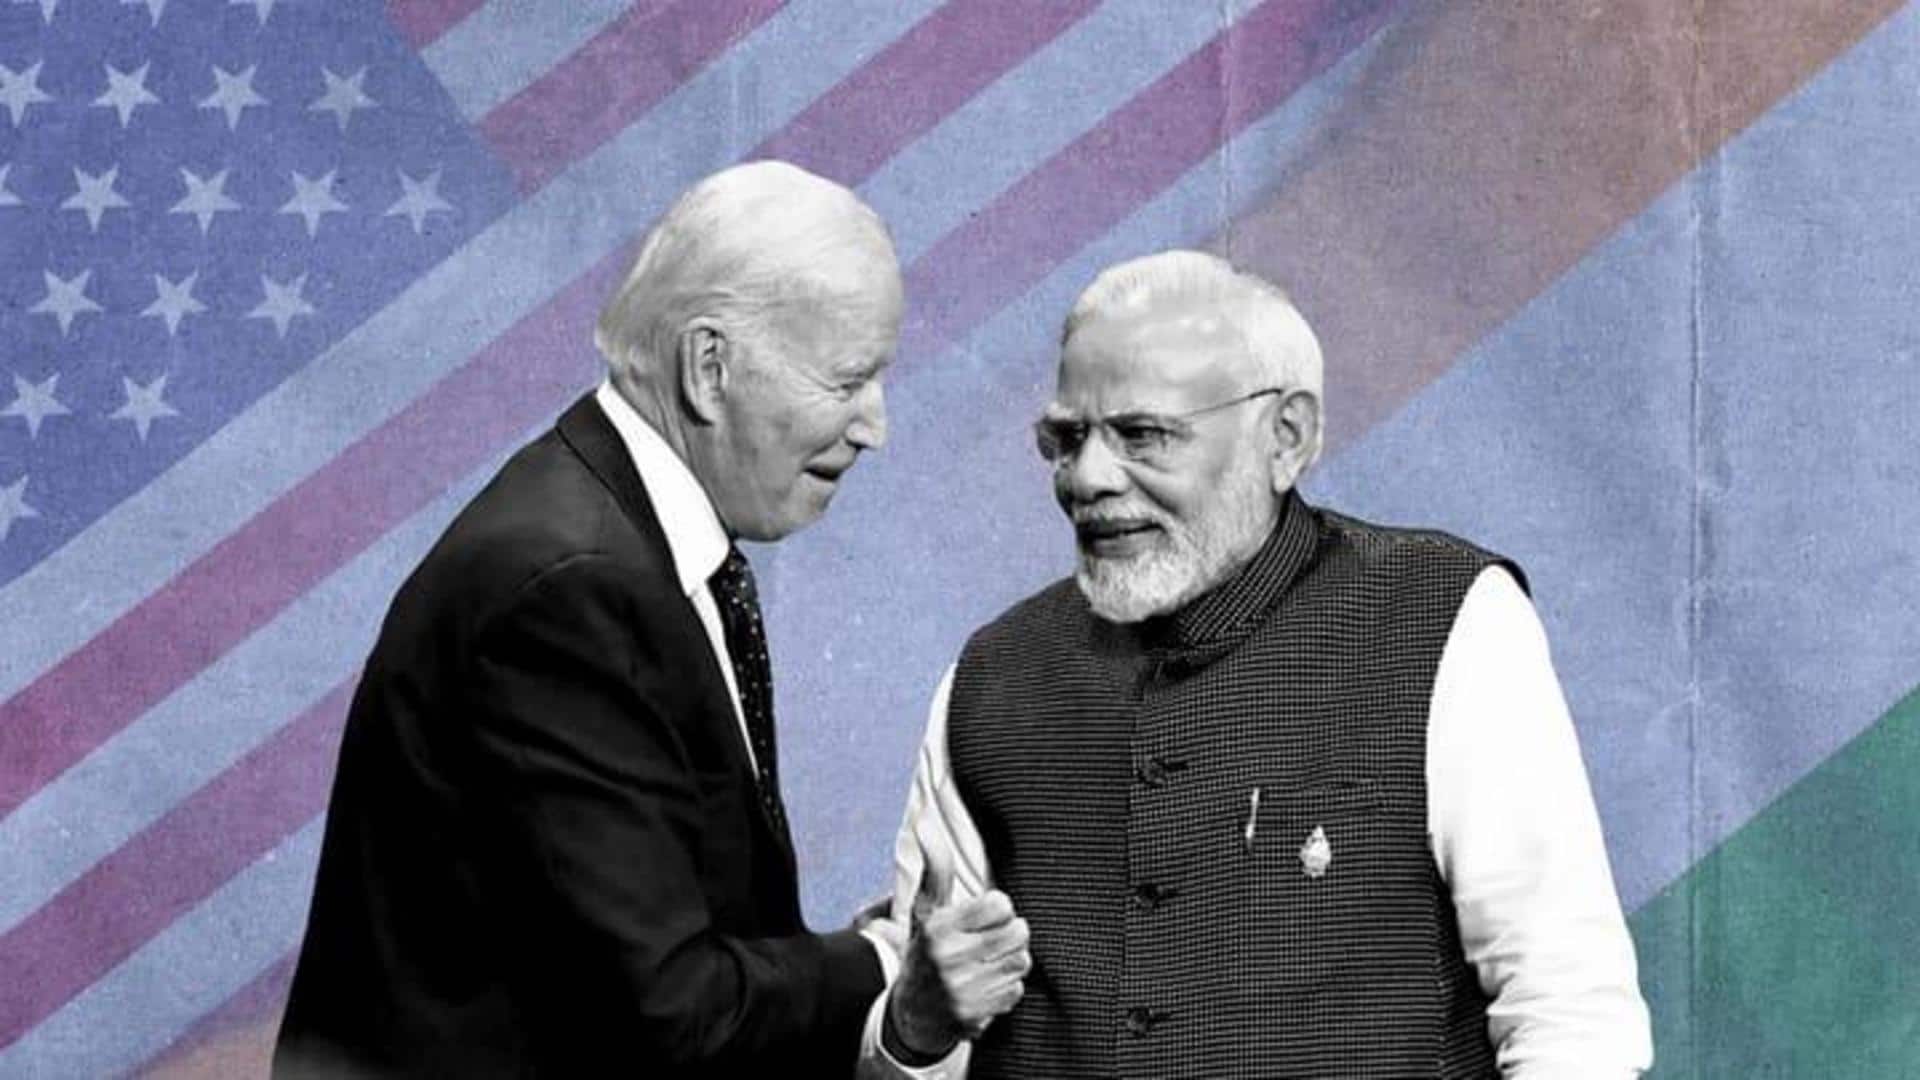 Modi to address US Congress's joint session on June 22